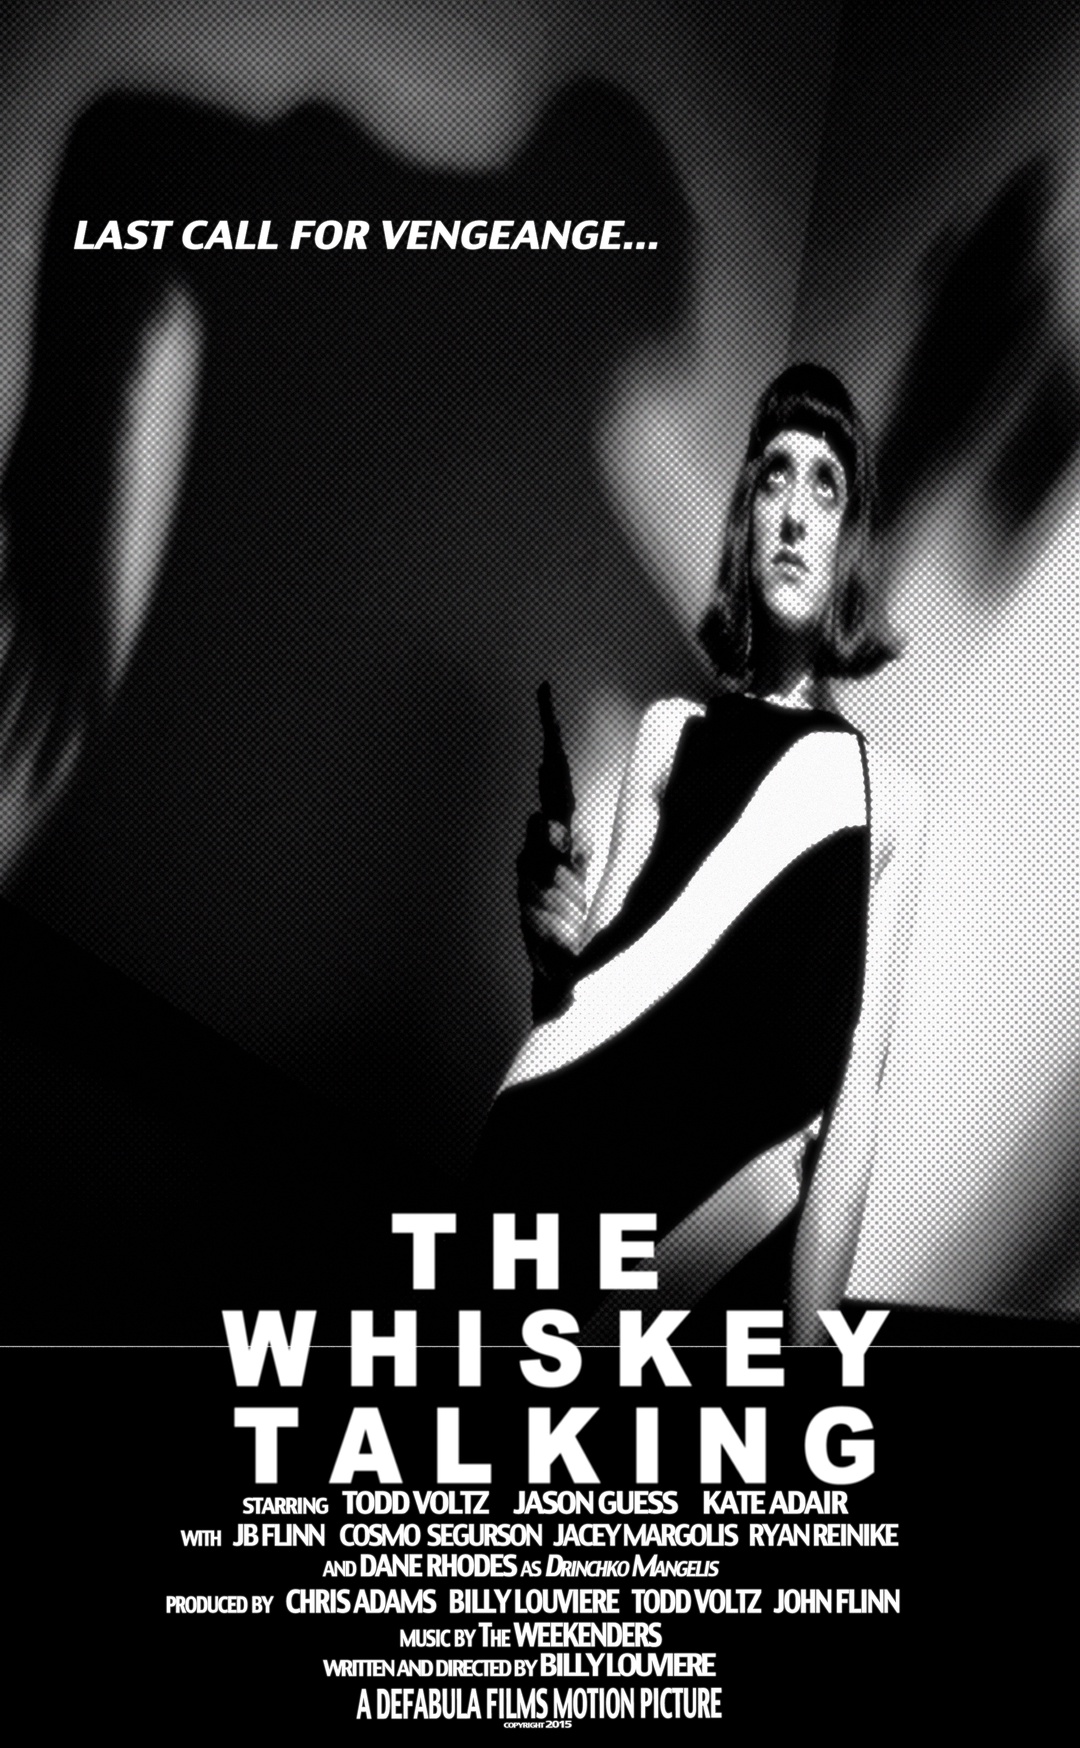 The Whiskey Talking